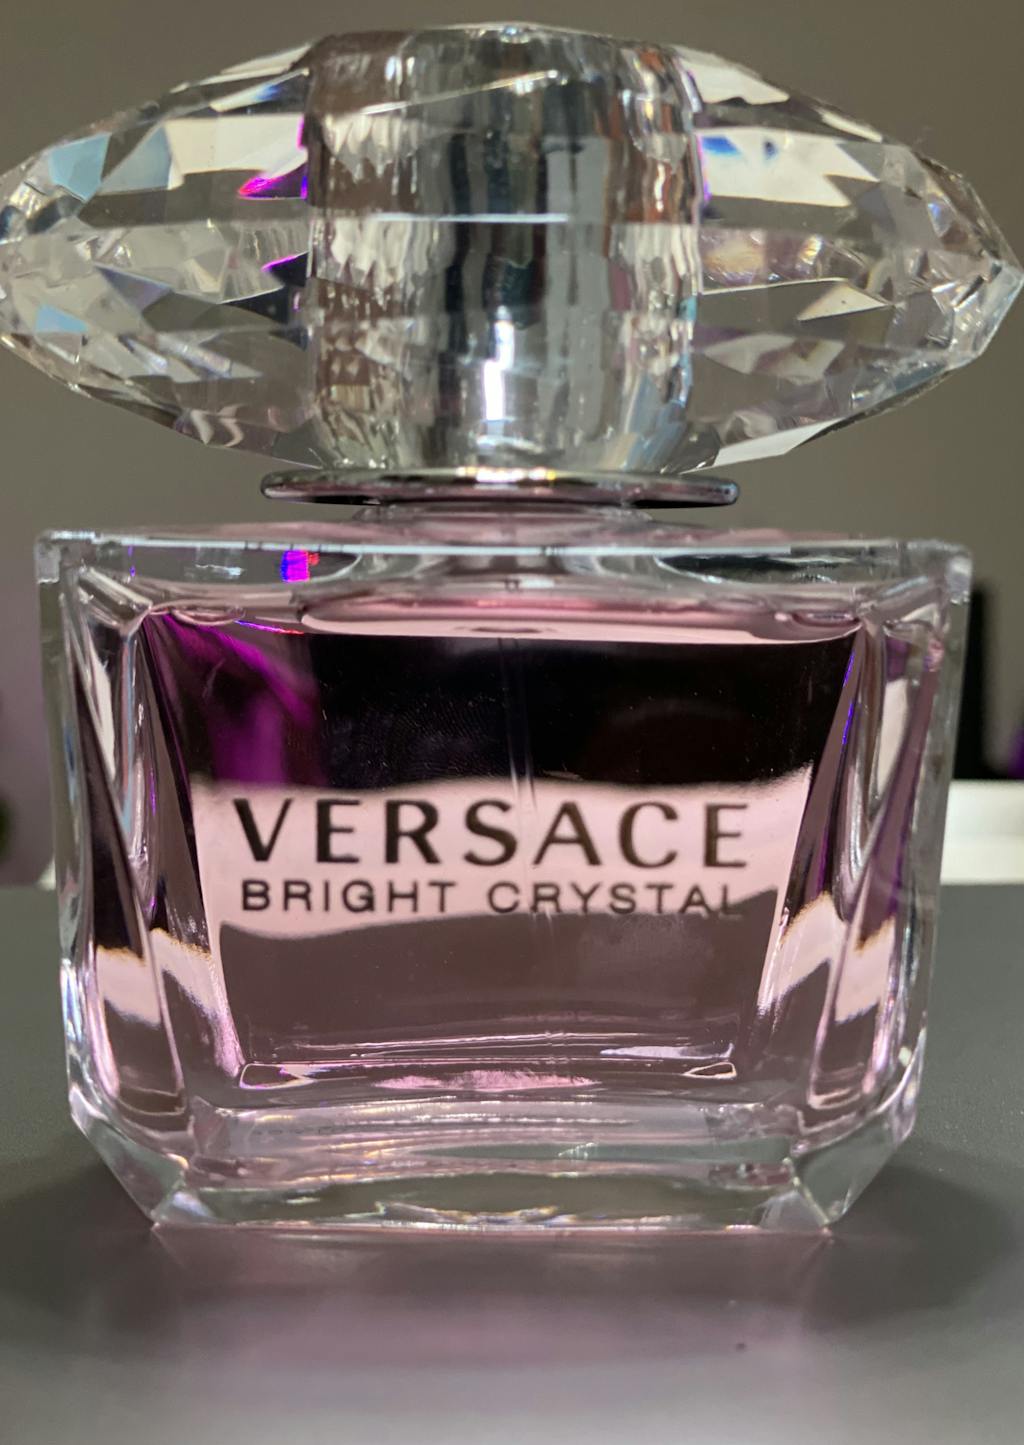 VERSACE BRIGHT CRYSTAL Perfume in Canada stating from $32.00